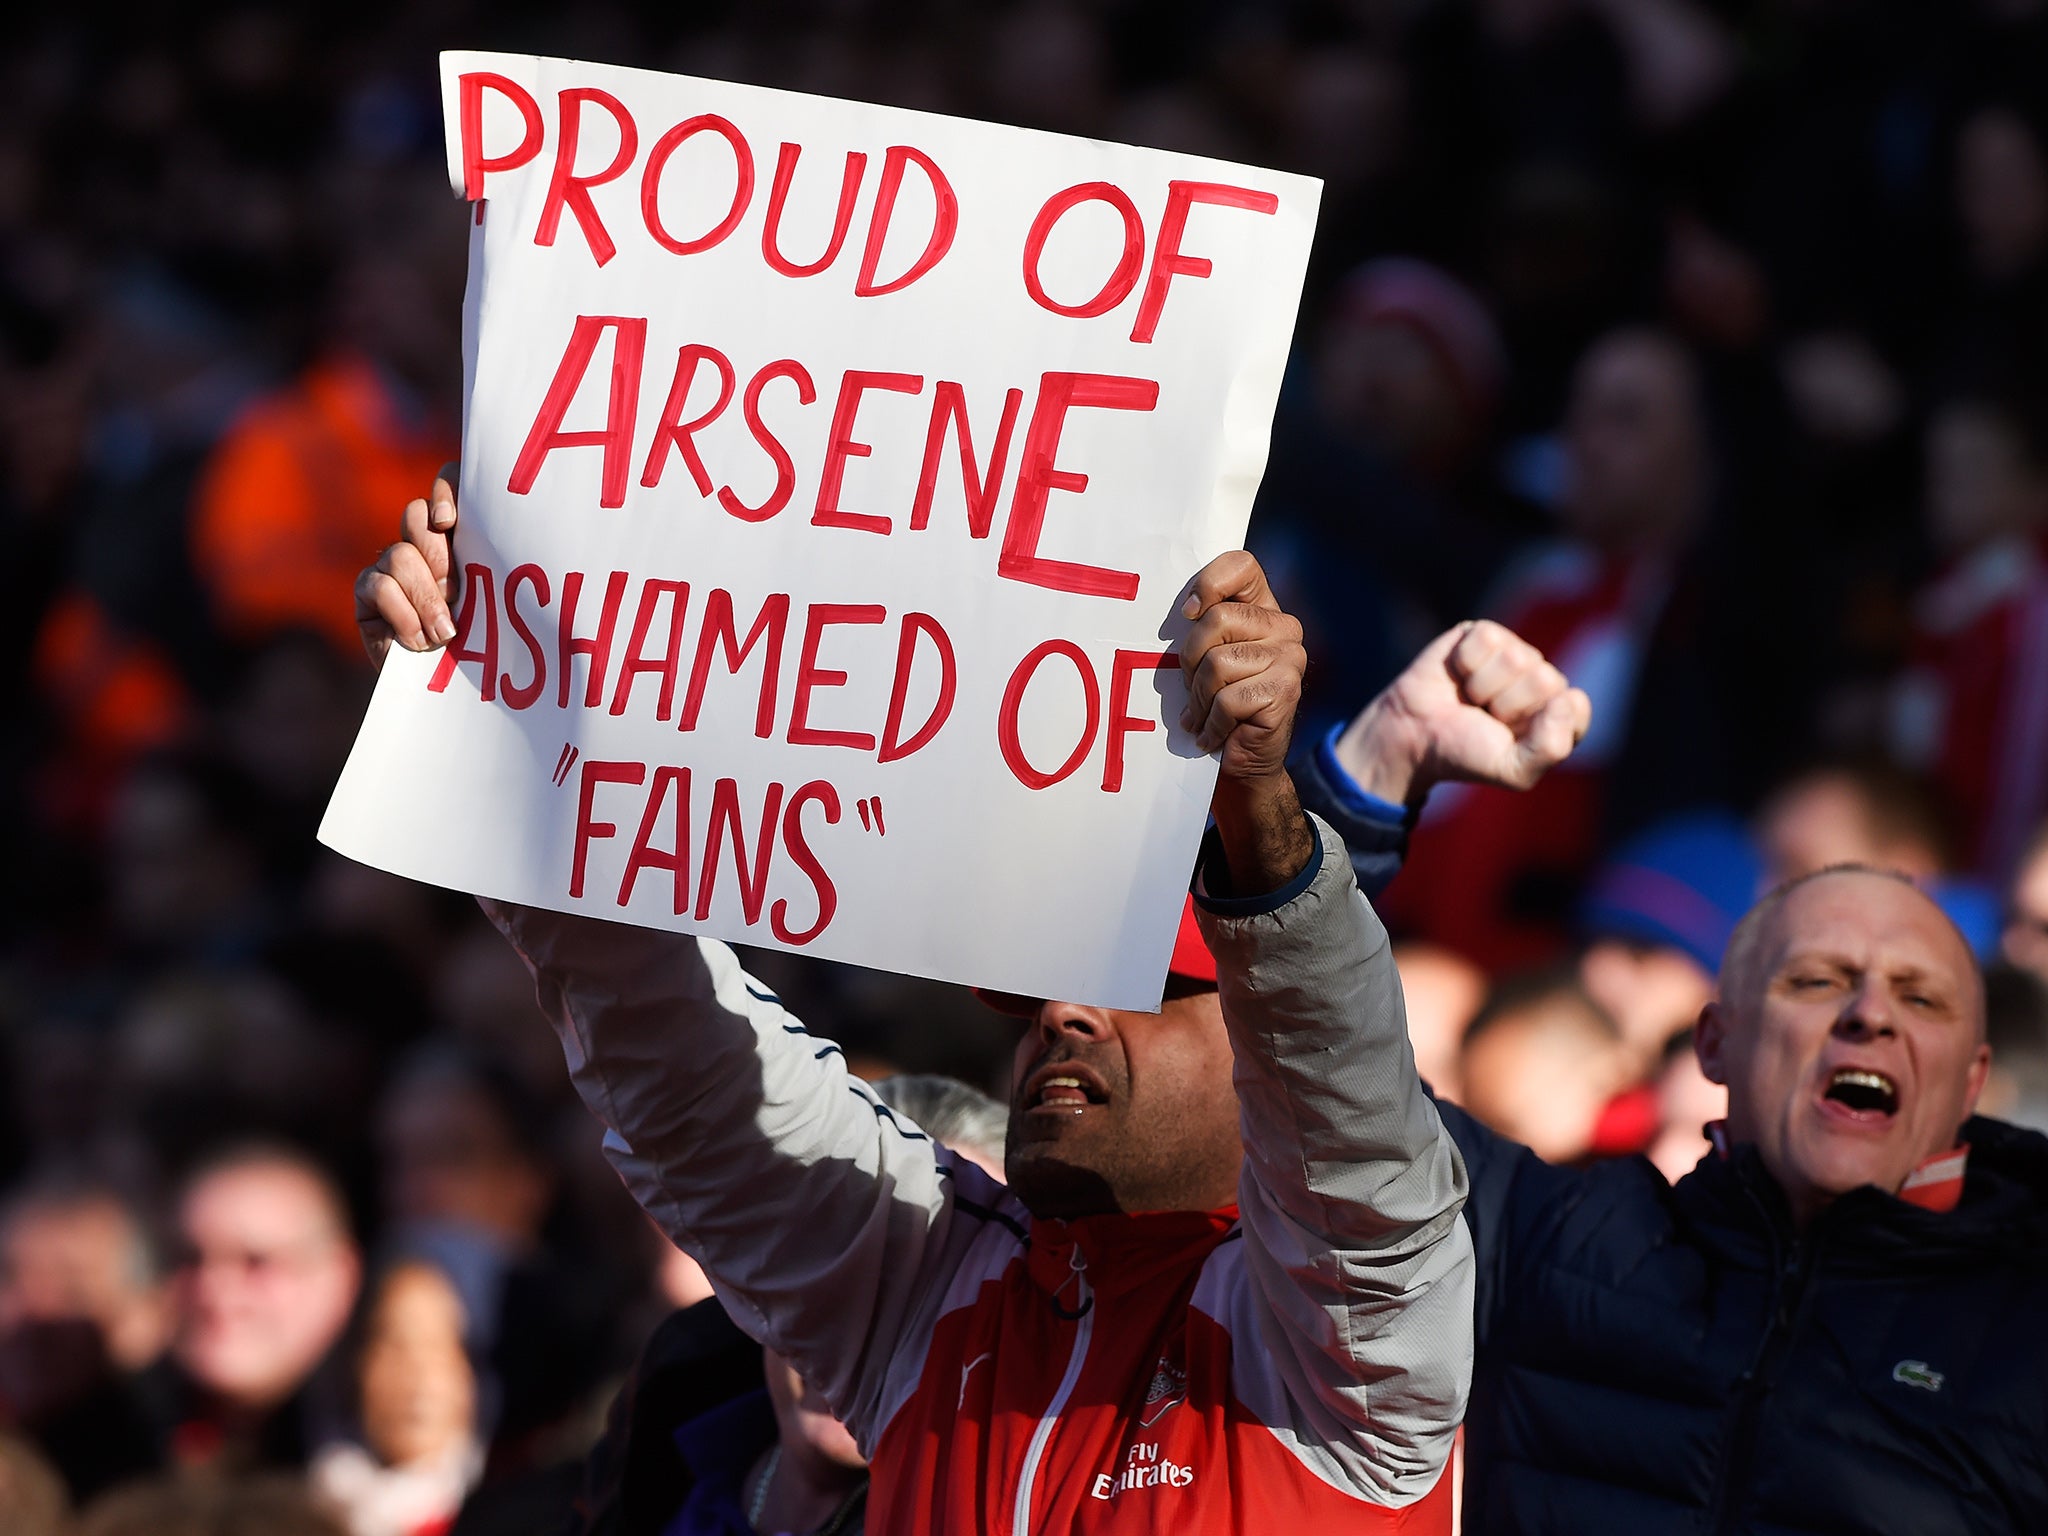 The majority of the home fans backed Arsene Wenger at The Emirates